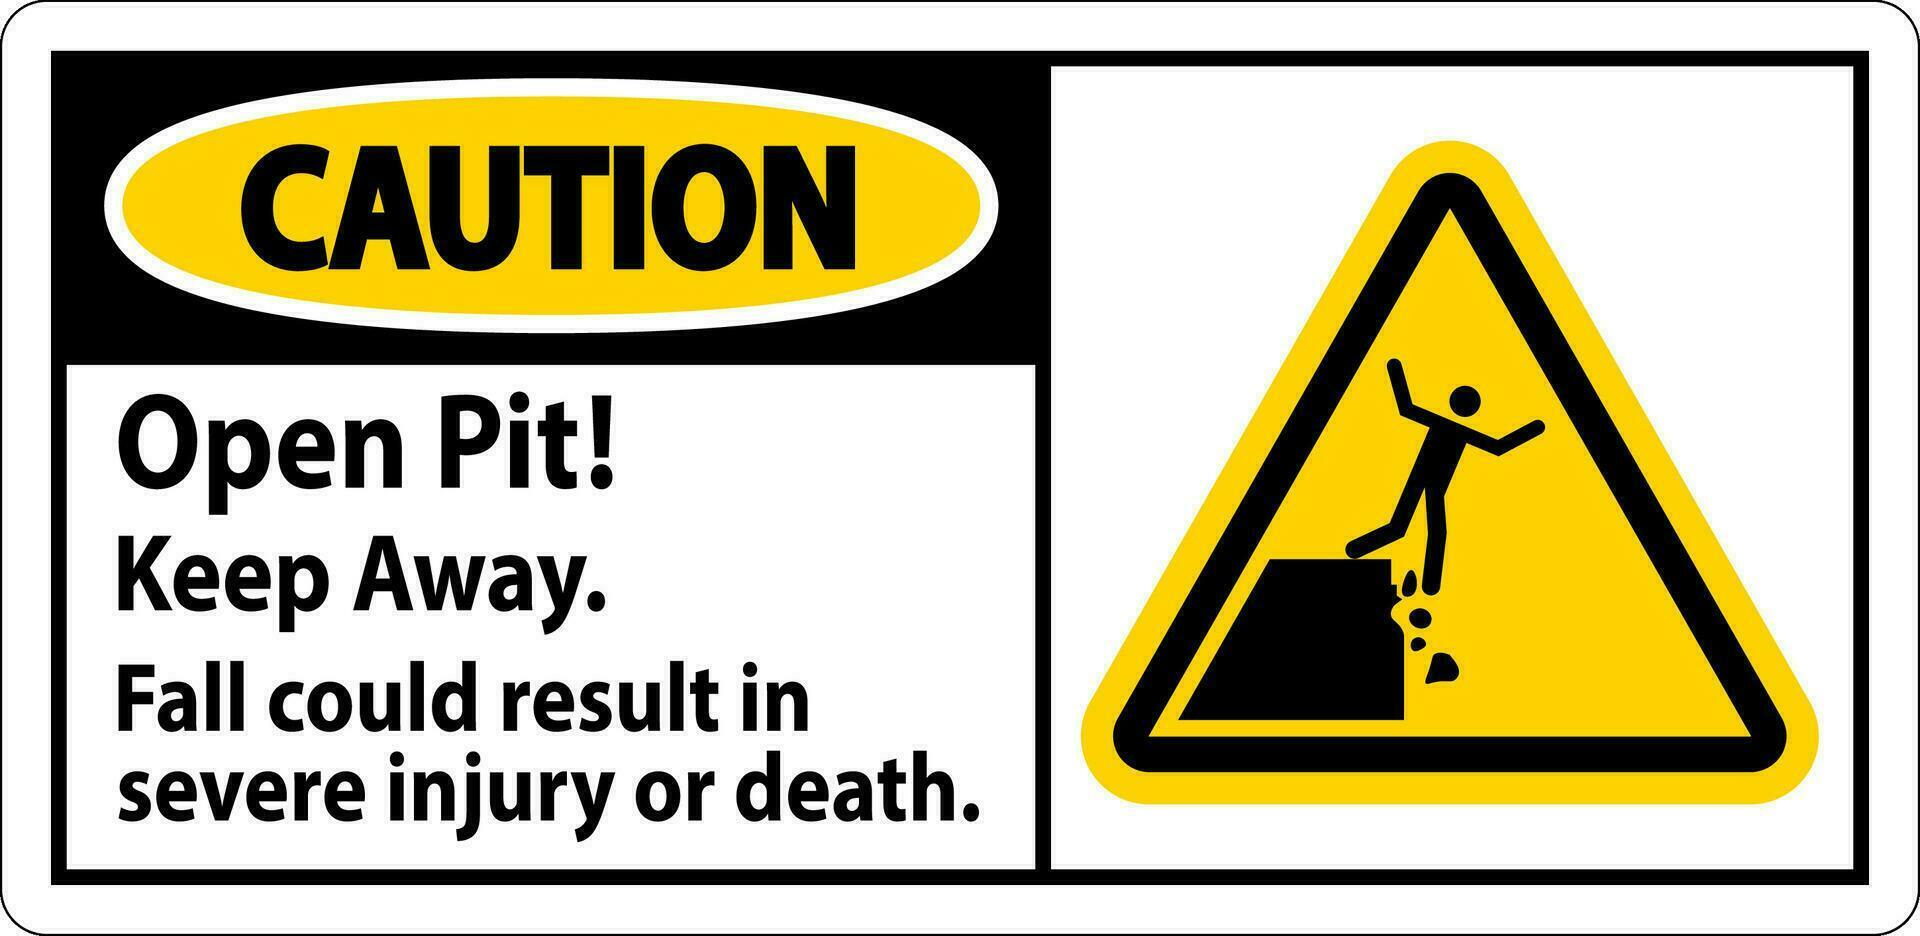 Caution Sign Open Pit Keep Away Fall Could Result In Severe Injury Or Death vector